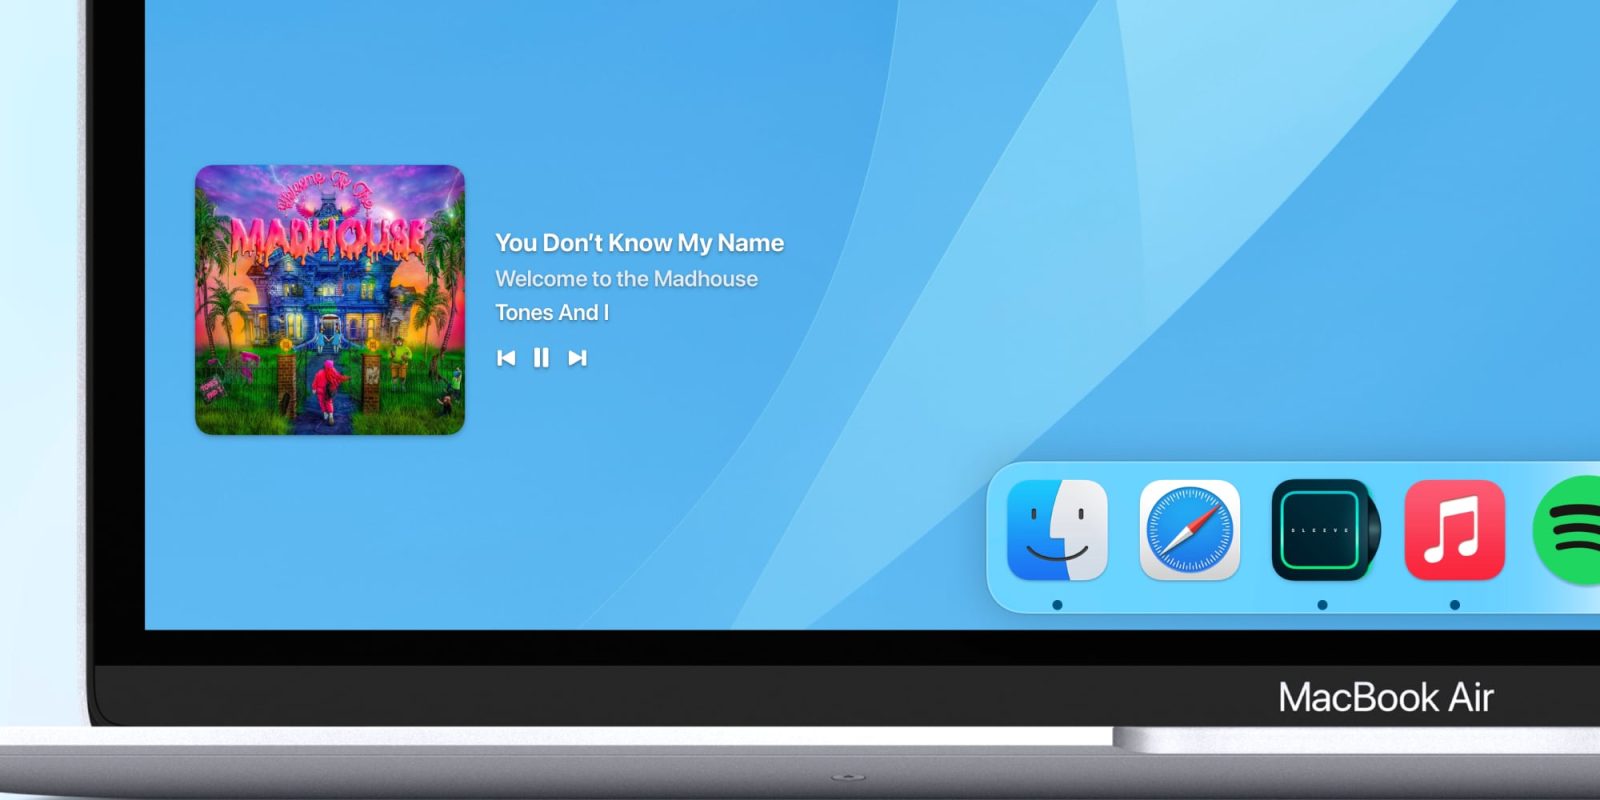 Sleeve' brings an Apple Music or Spotify now playing widget to your Mac's  desktop - 9to5Mac